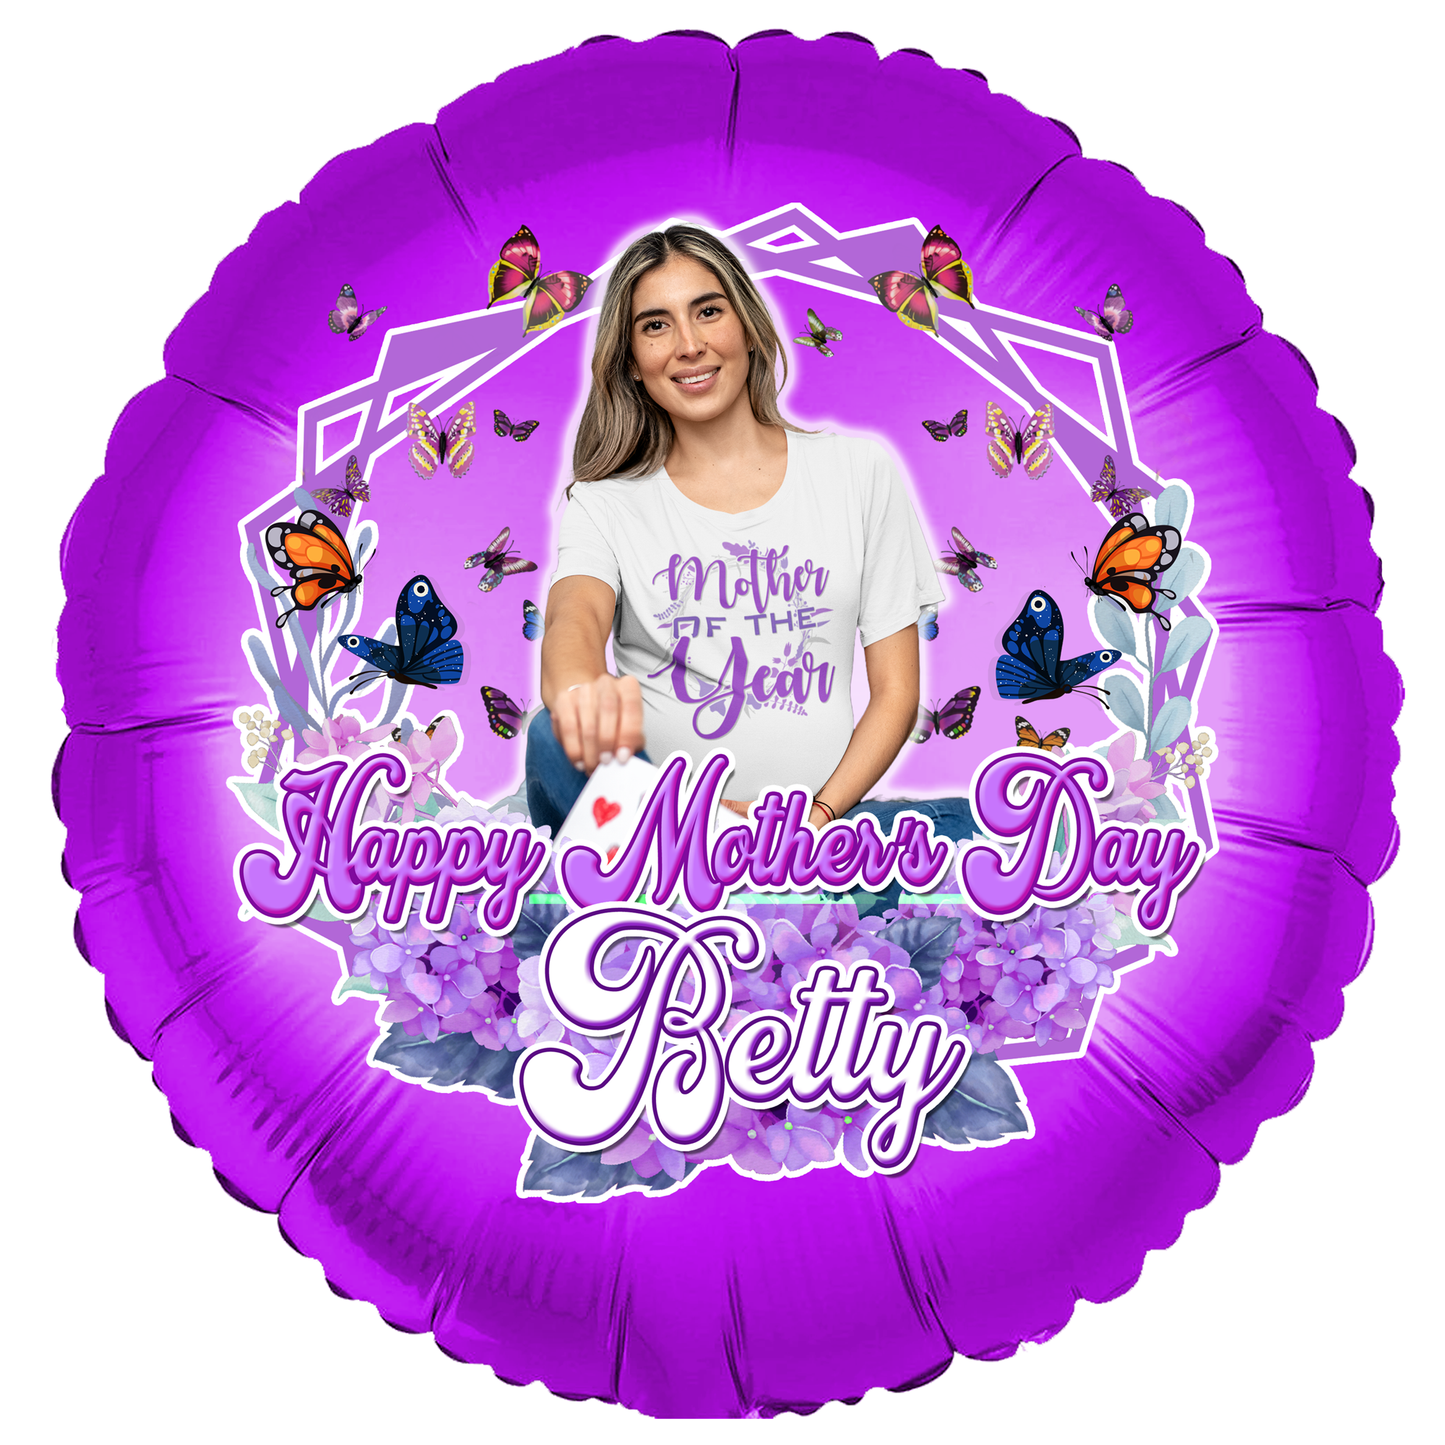 Personalized Mother's Day Balloons with Photo - Wilson Design Group